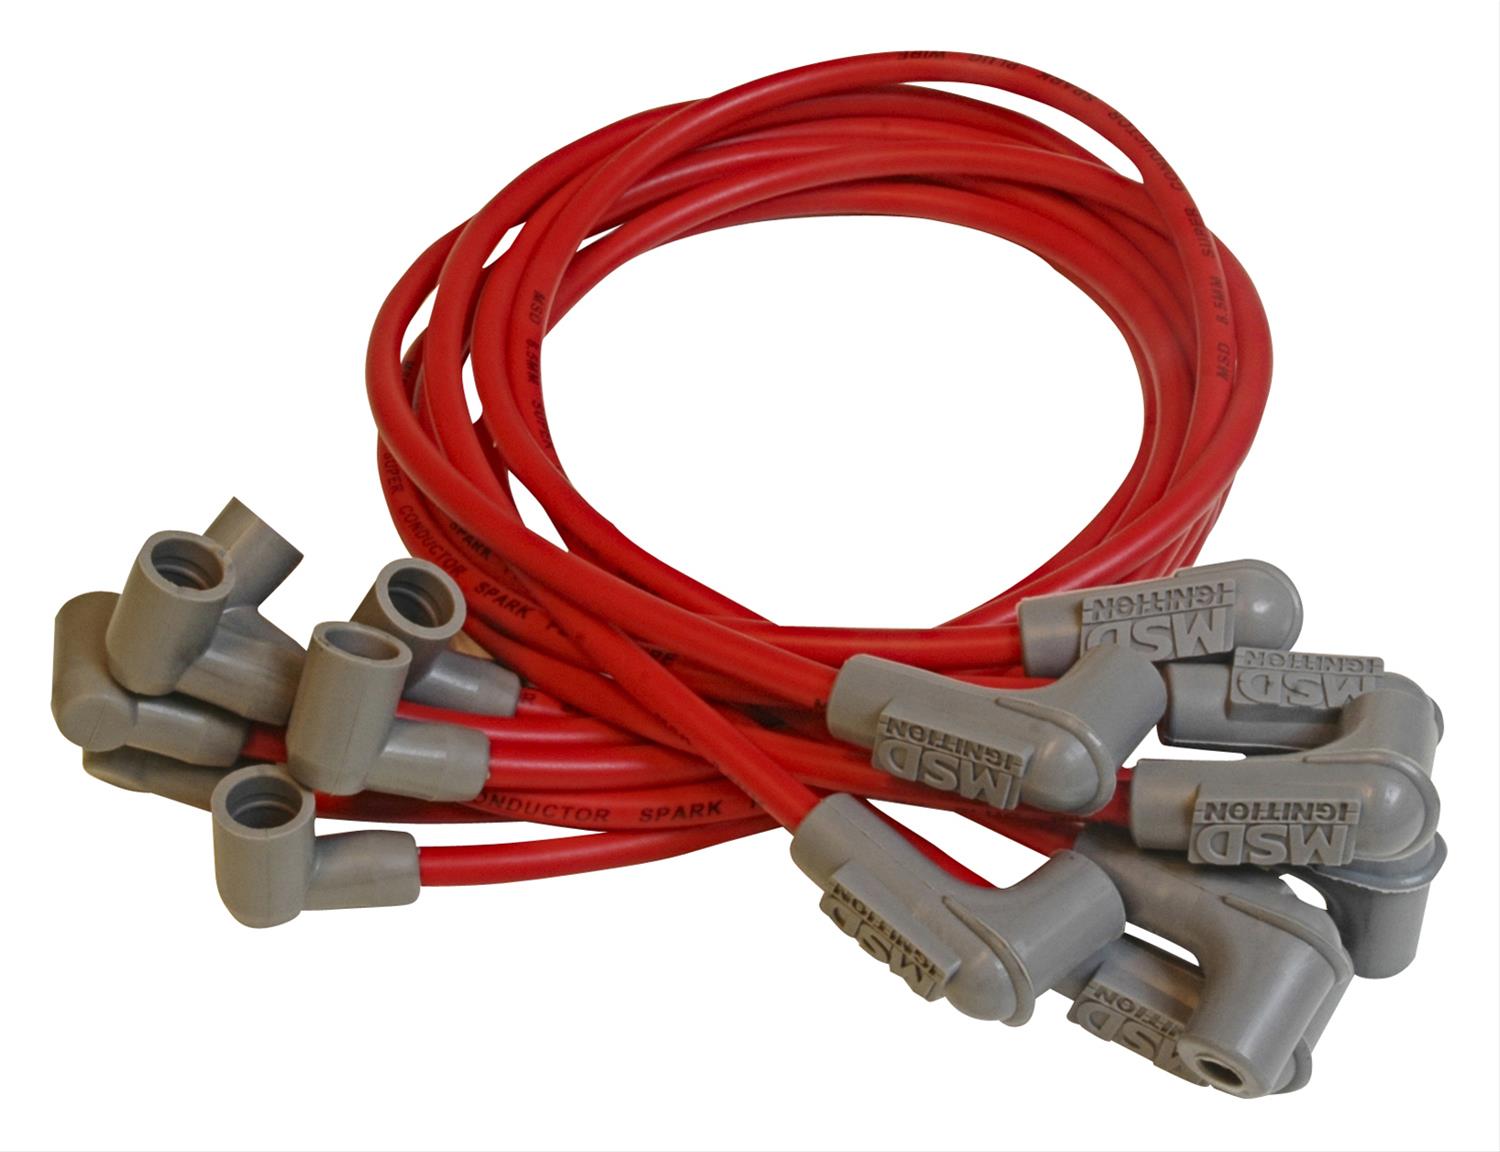 www.sixpackmotors-shop.ch - MSD HELICORE WIRES